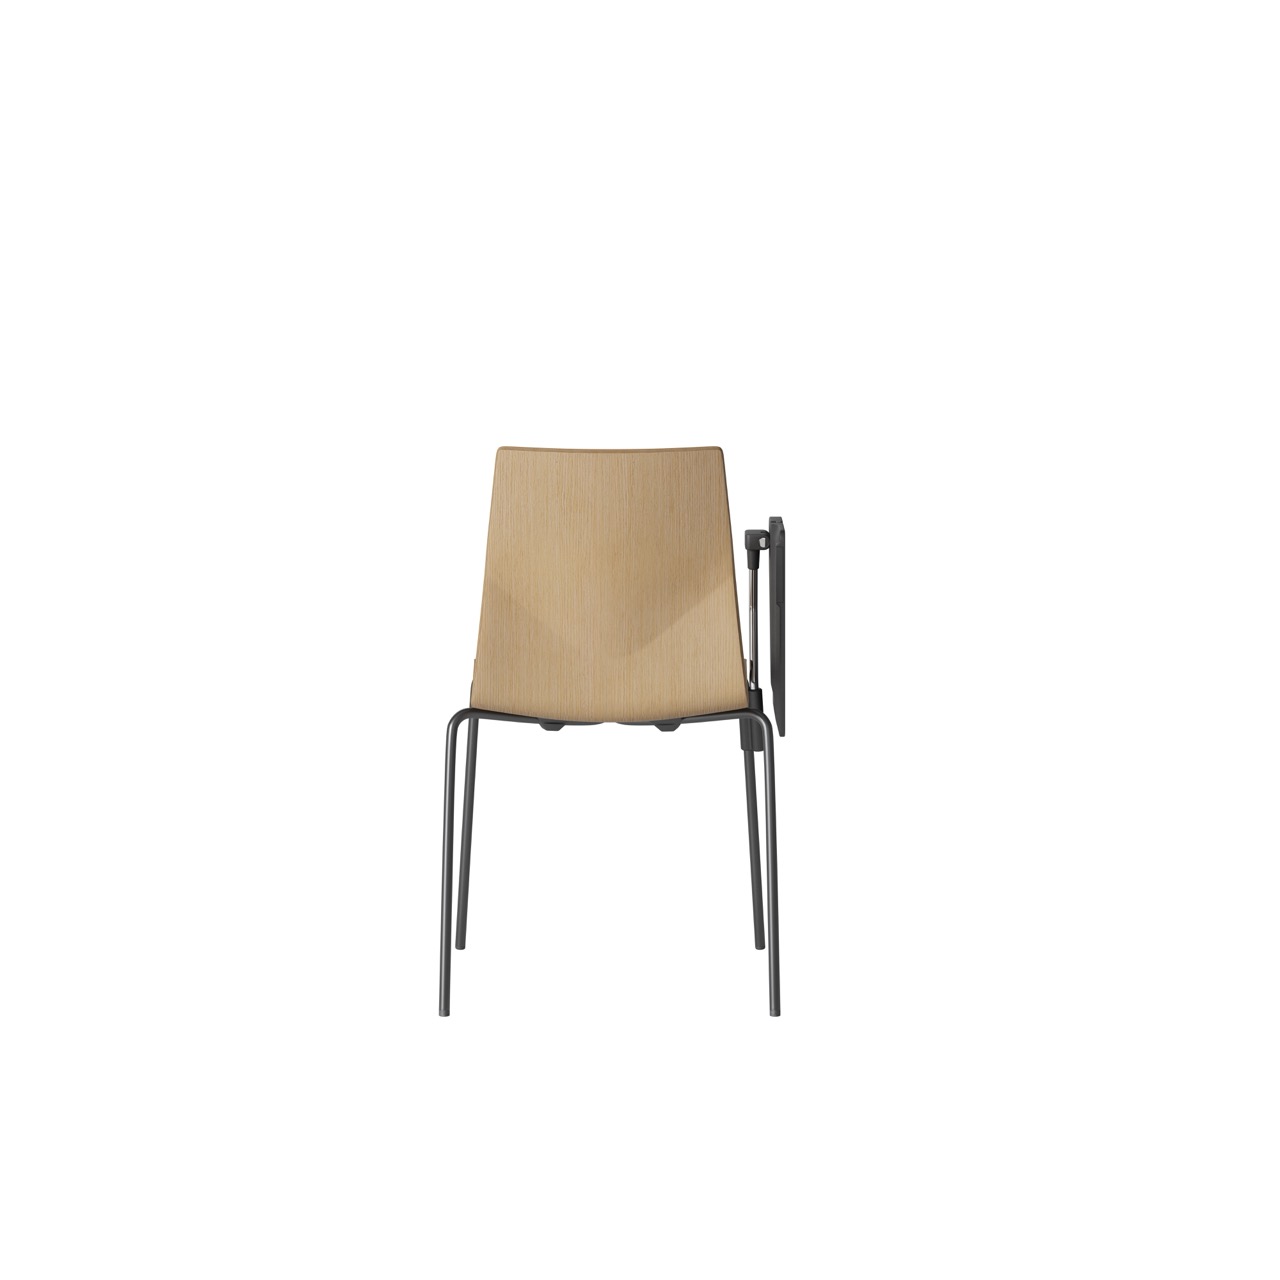 OCEE&FOUR – Chairs – FourCast 2 Four – Veneer shell - Inno Note - Nested - Packshot Image 3 Large